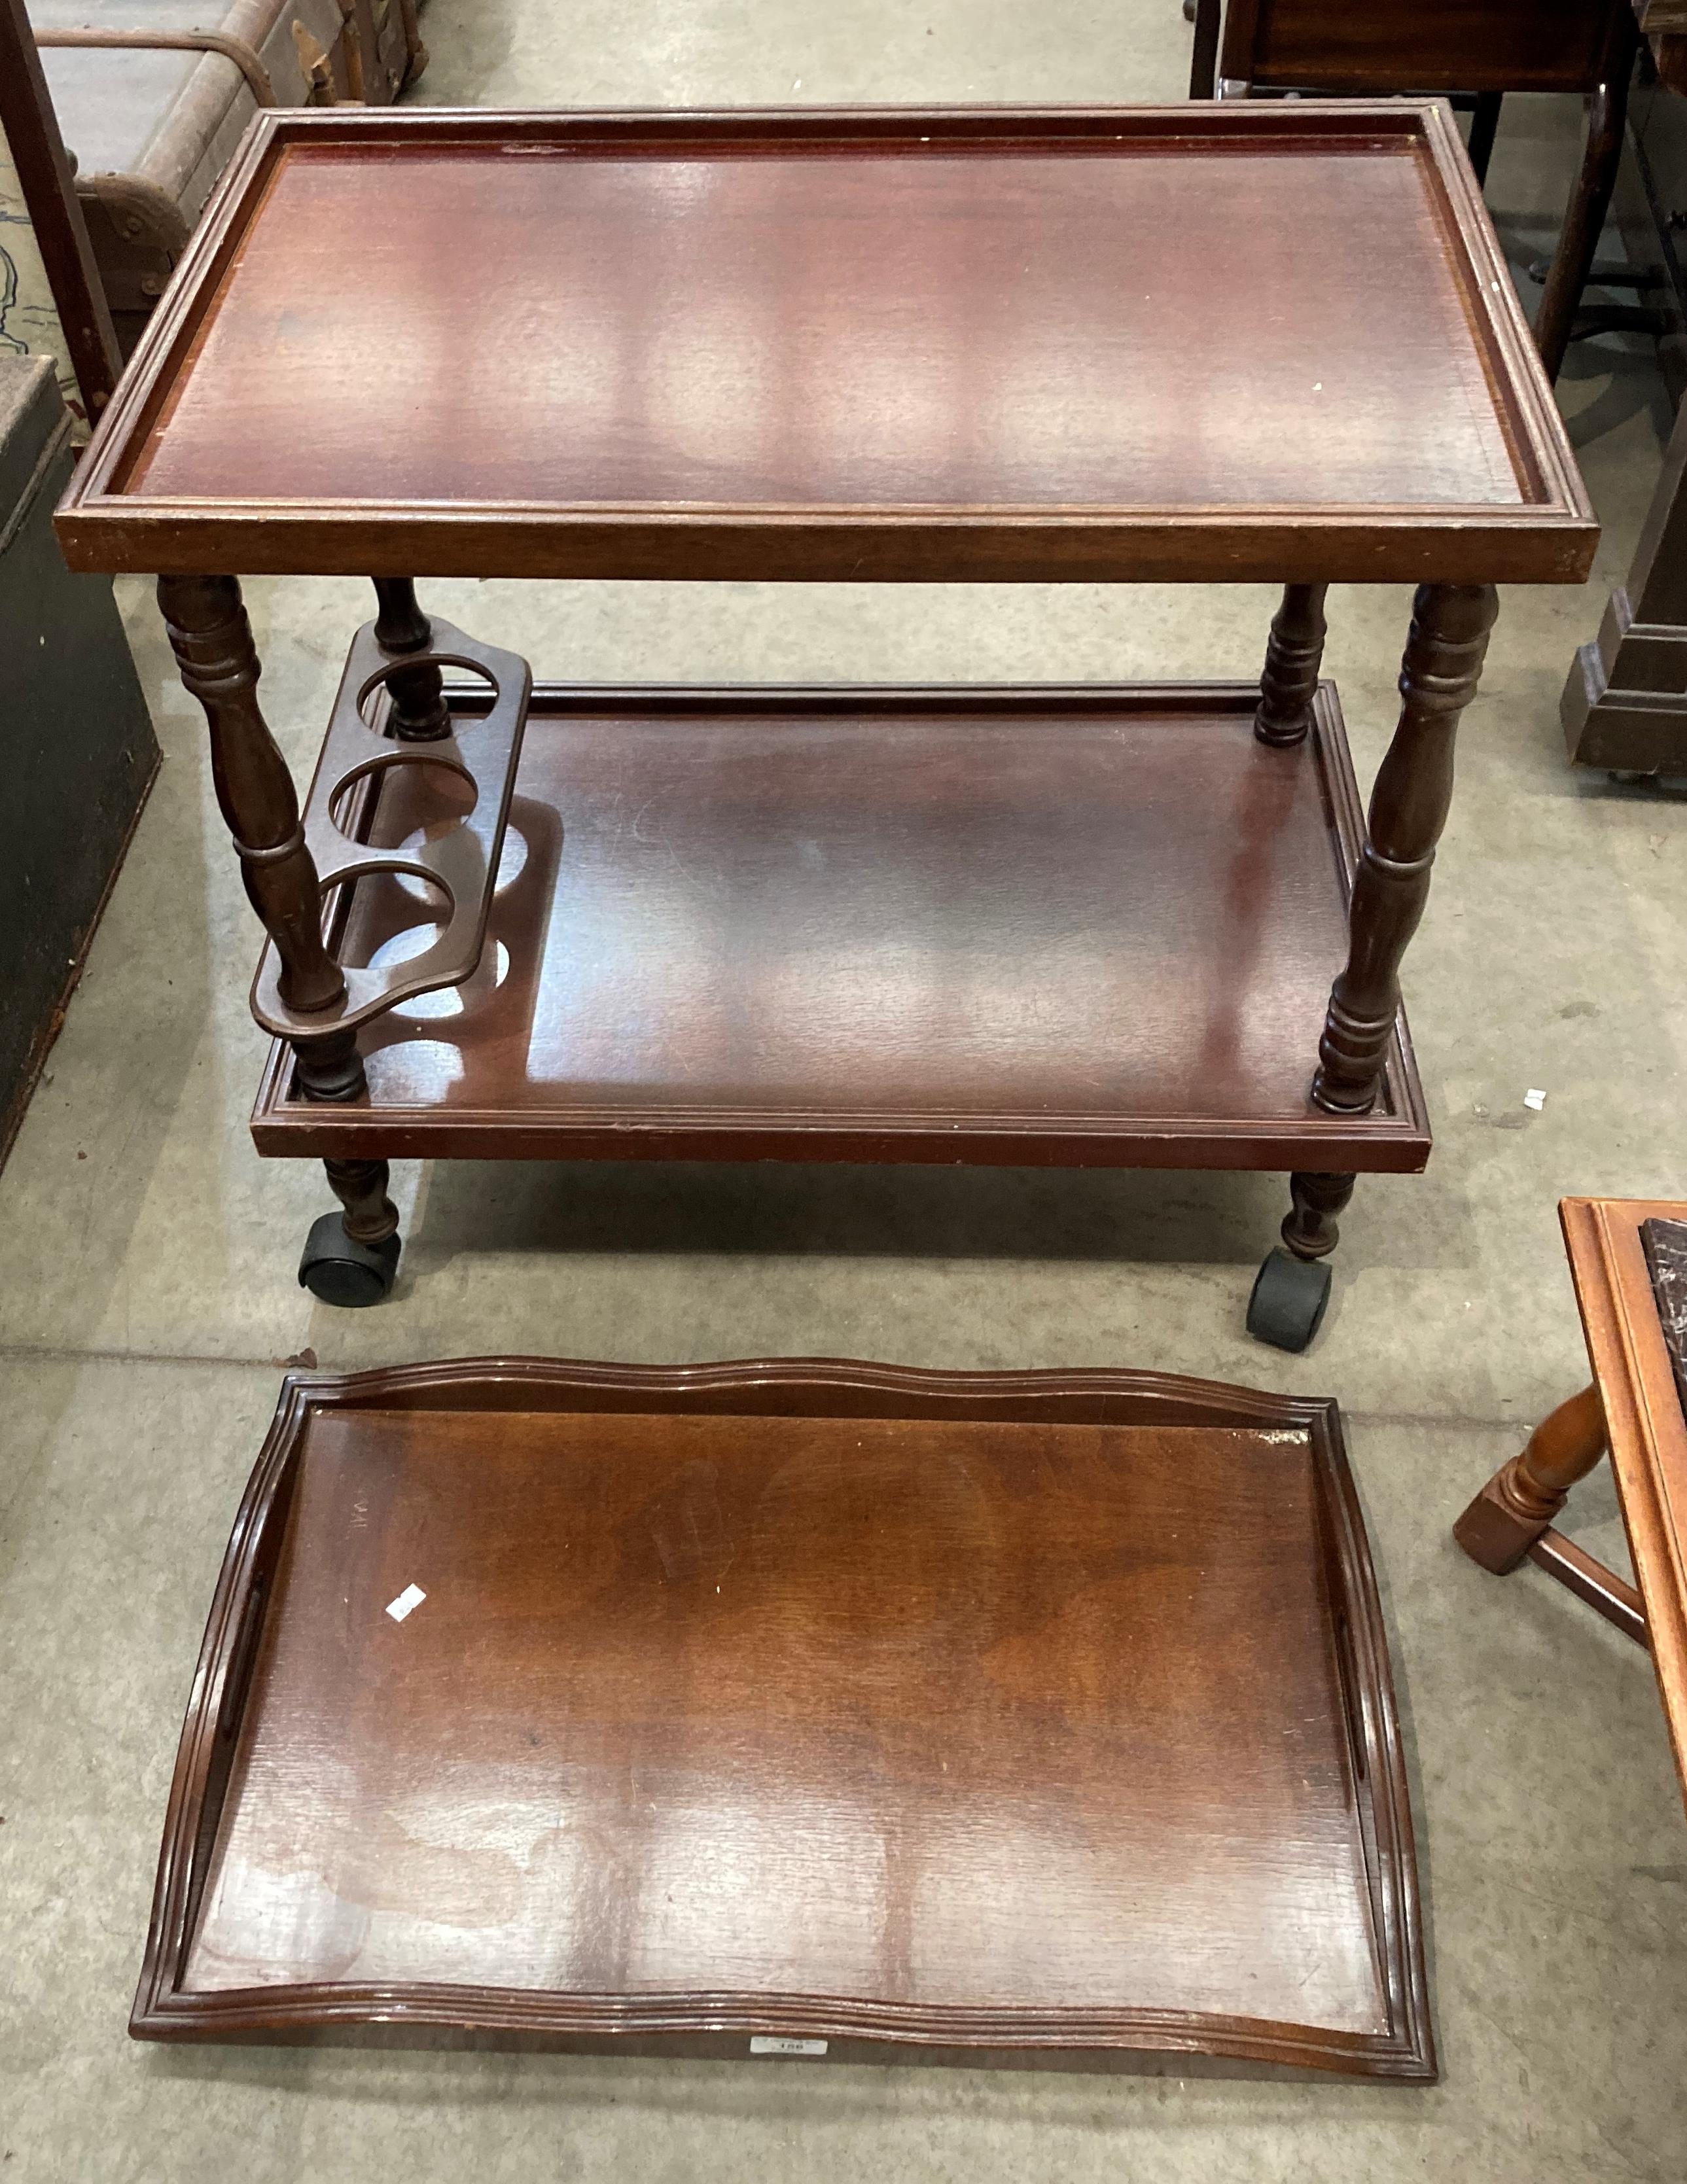 A mahogany mobile two tier drinks trolley with lift out Butlers tray - Image 2 of 2